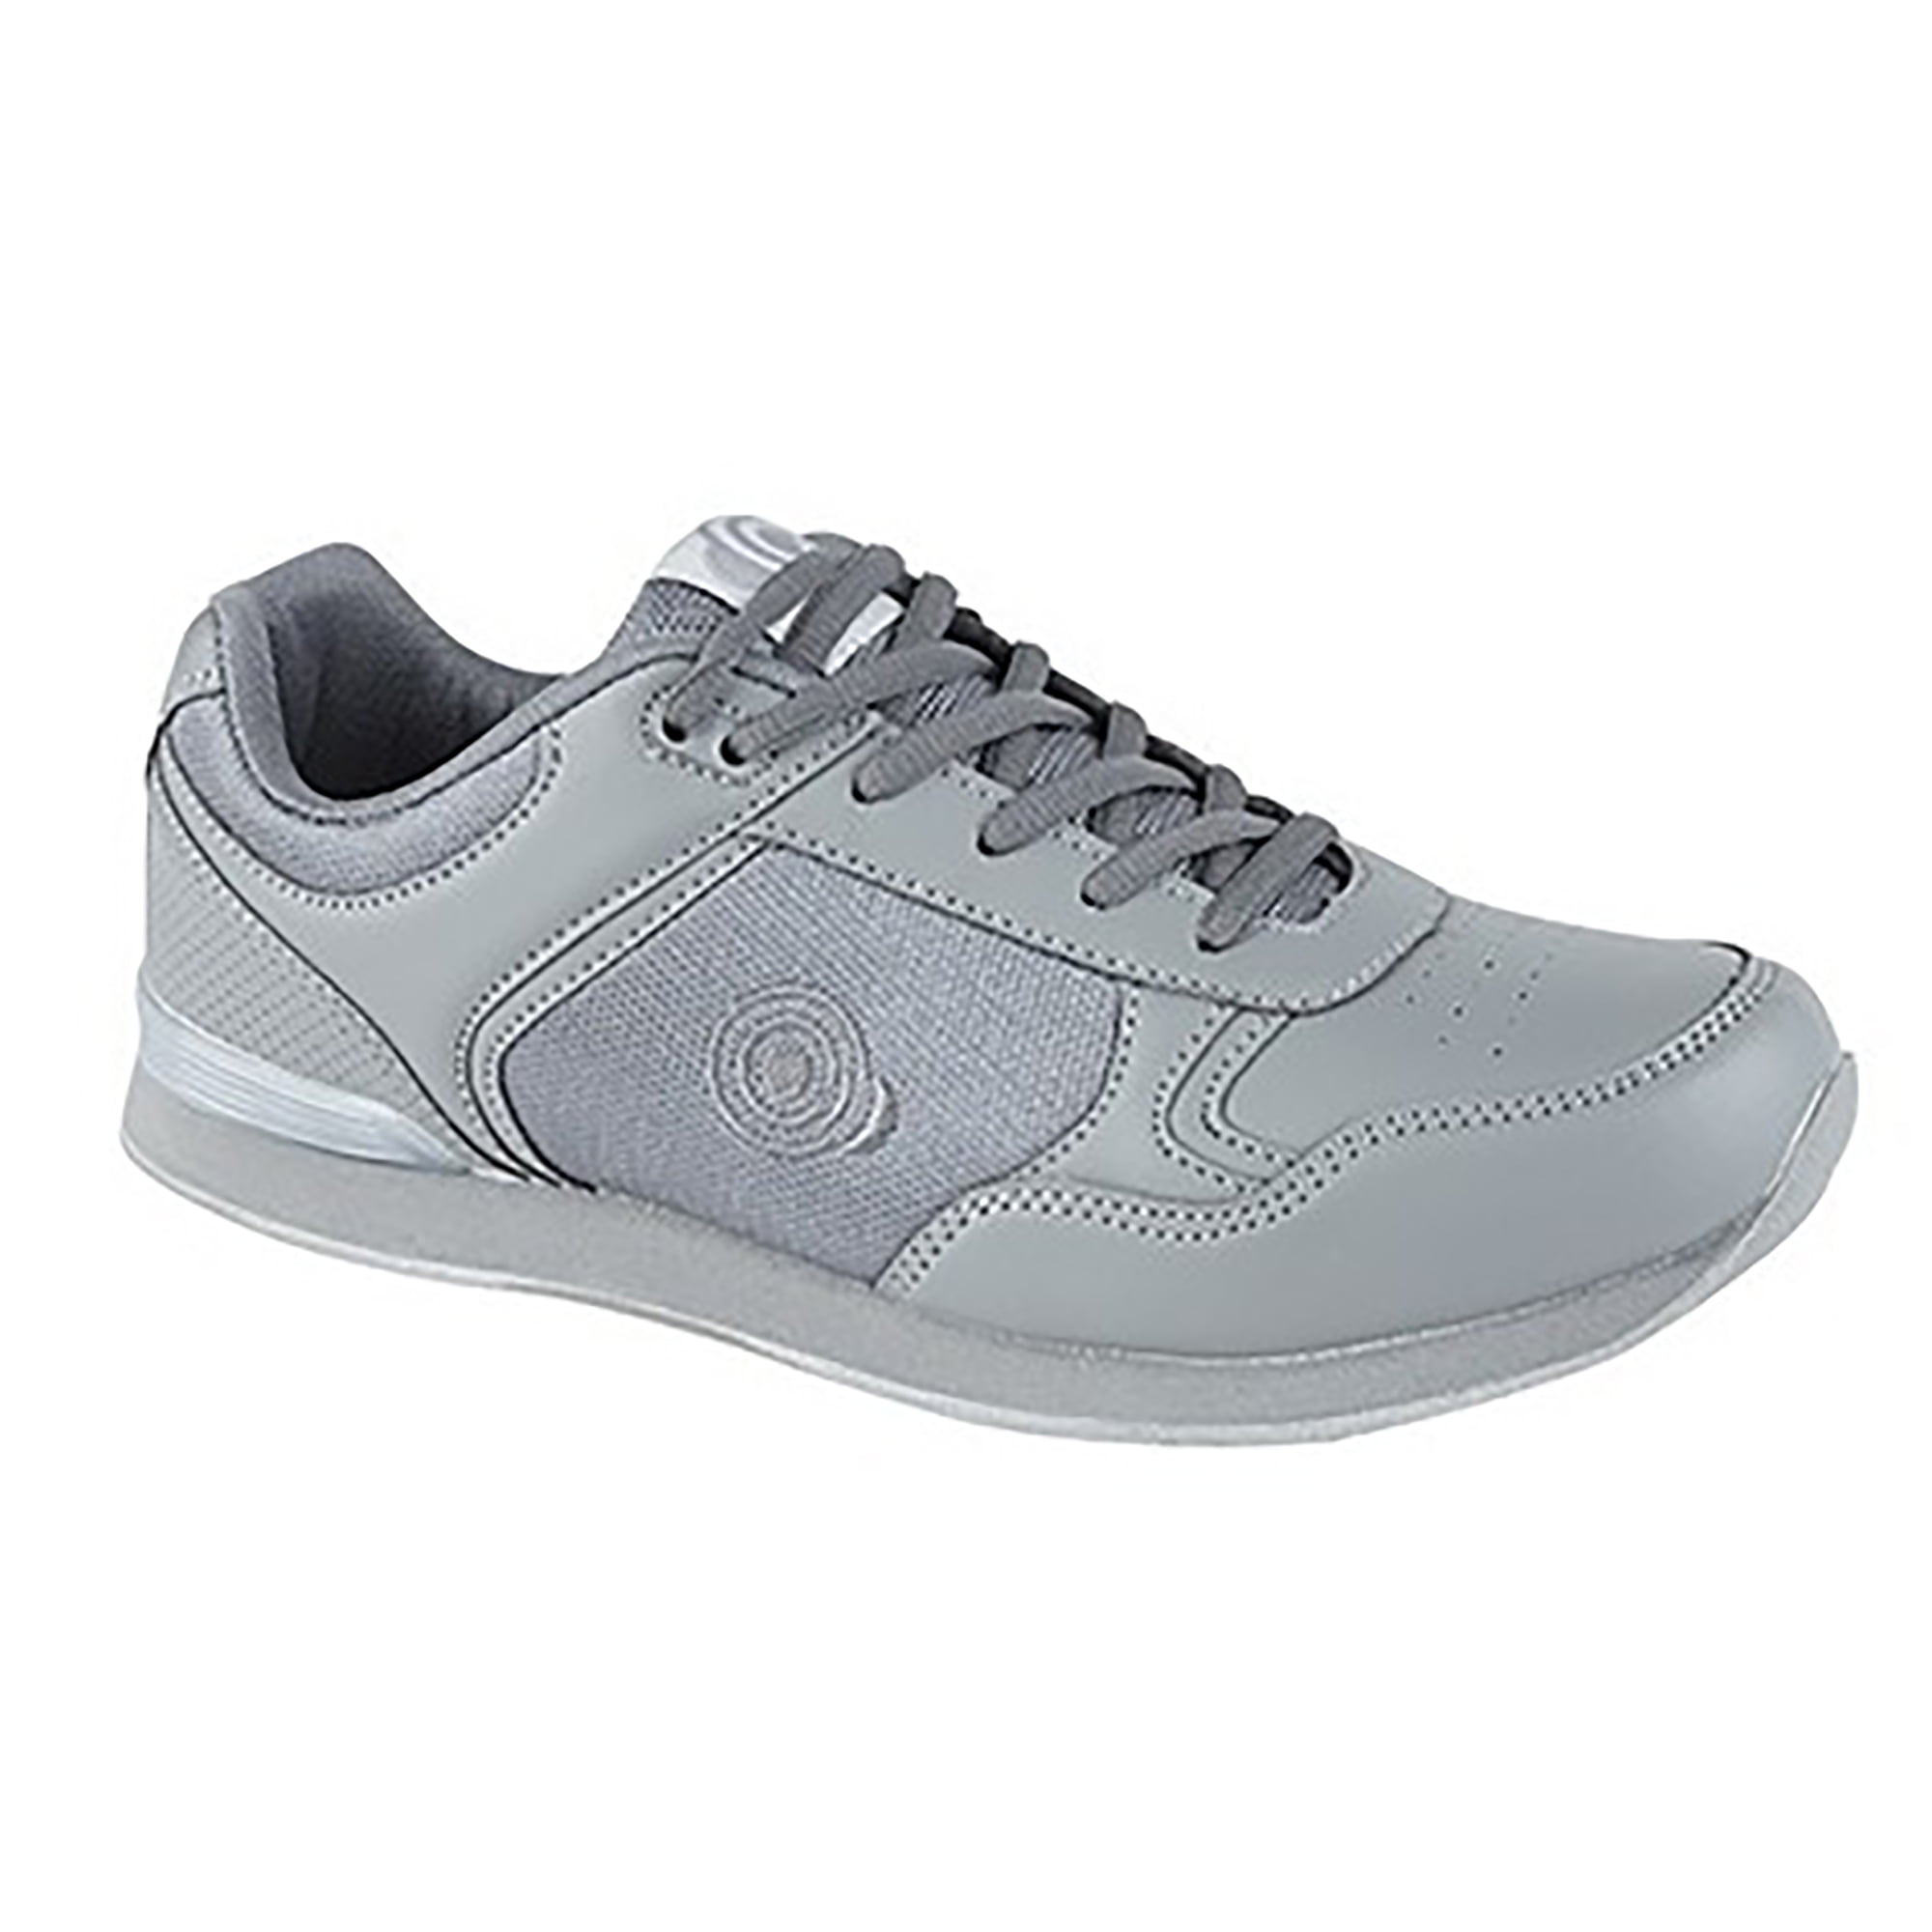 Mens DEK Bowls Grey Bowling Sports Touch Fastening Shoes Trainers 